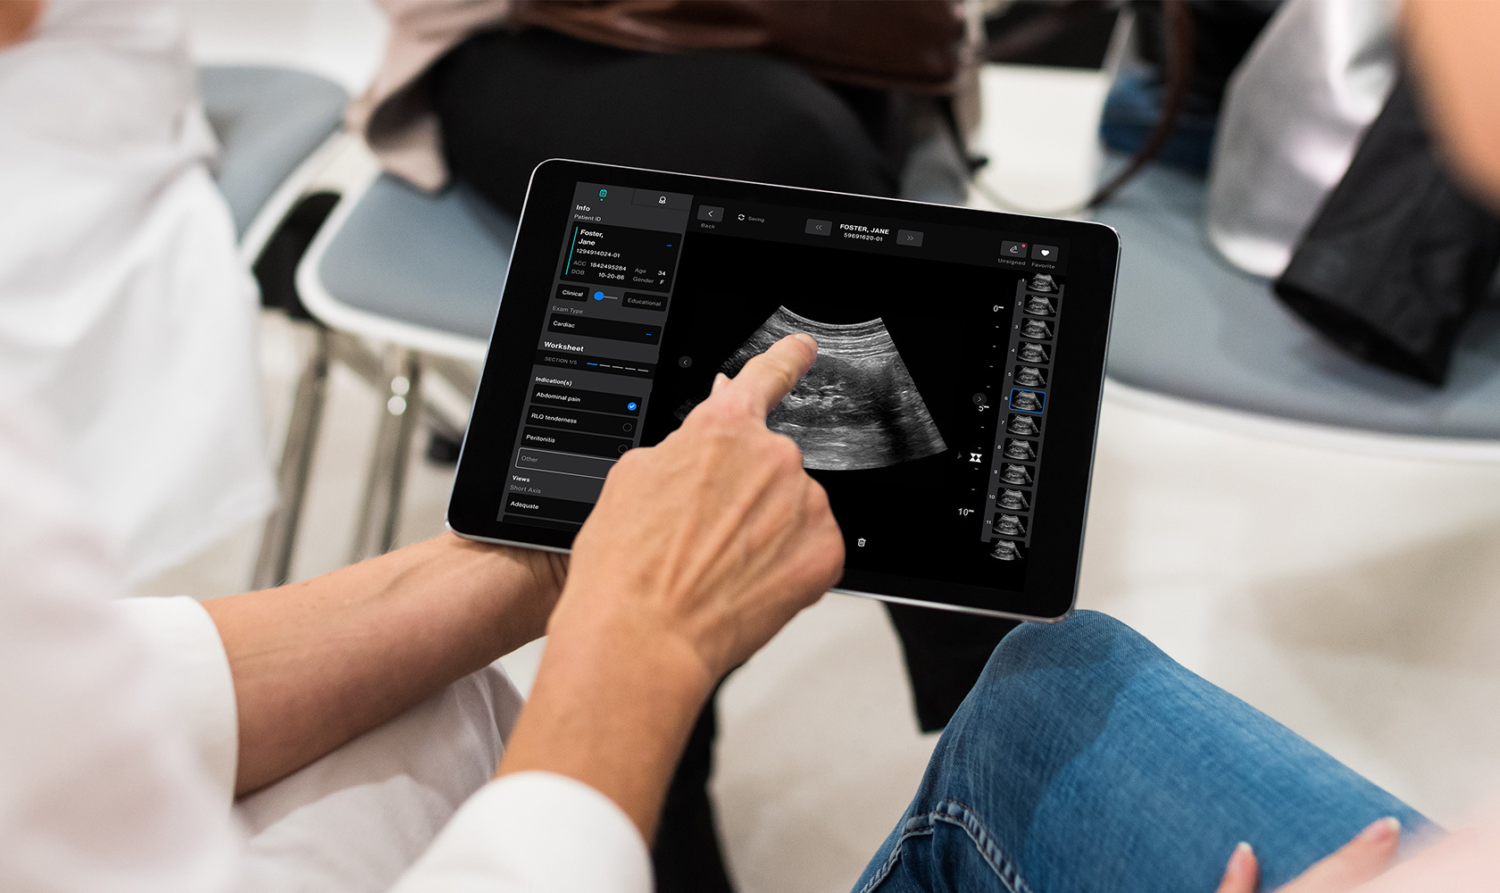 Exo Raises $22M to Commercialize Handheld, Point-of-Care Ultrasound Device